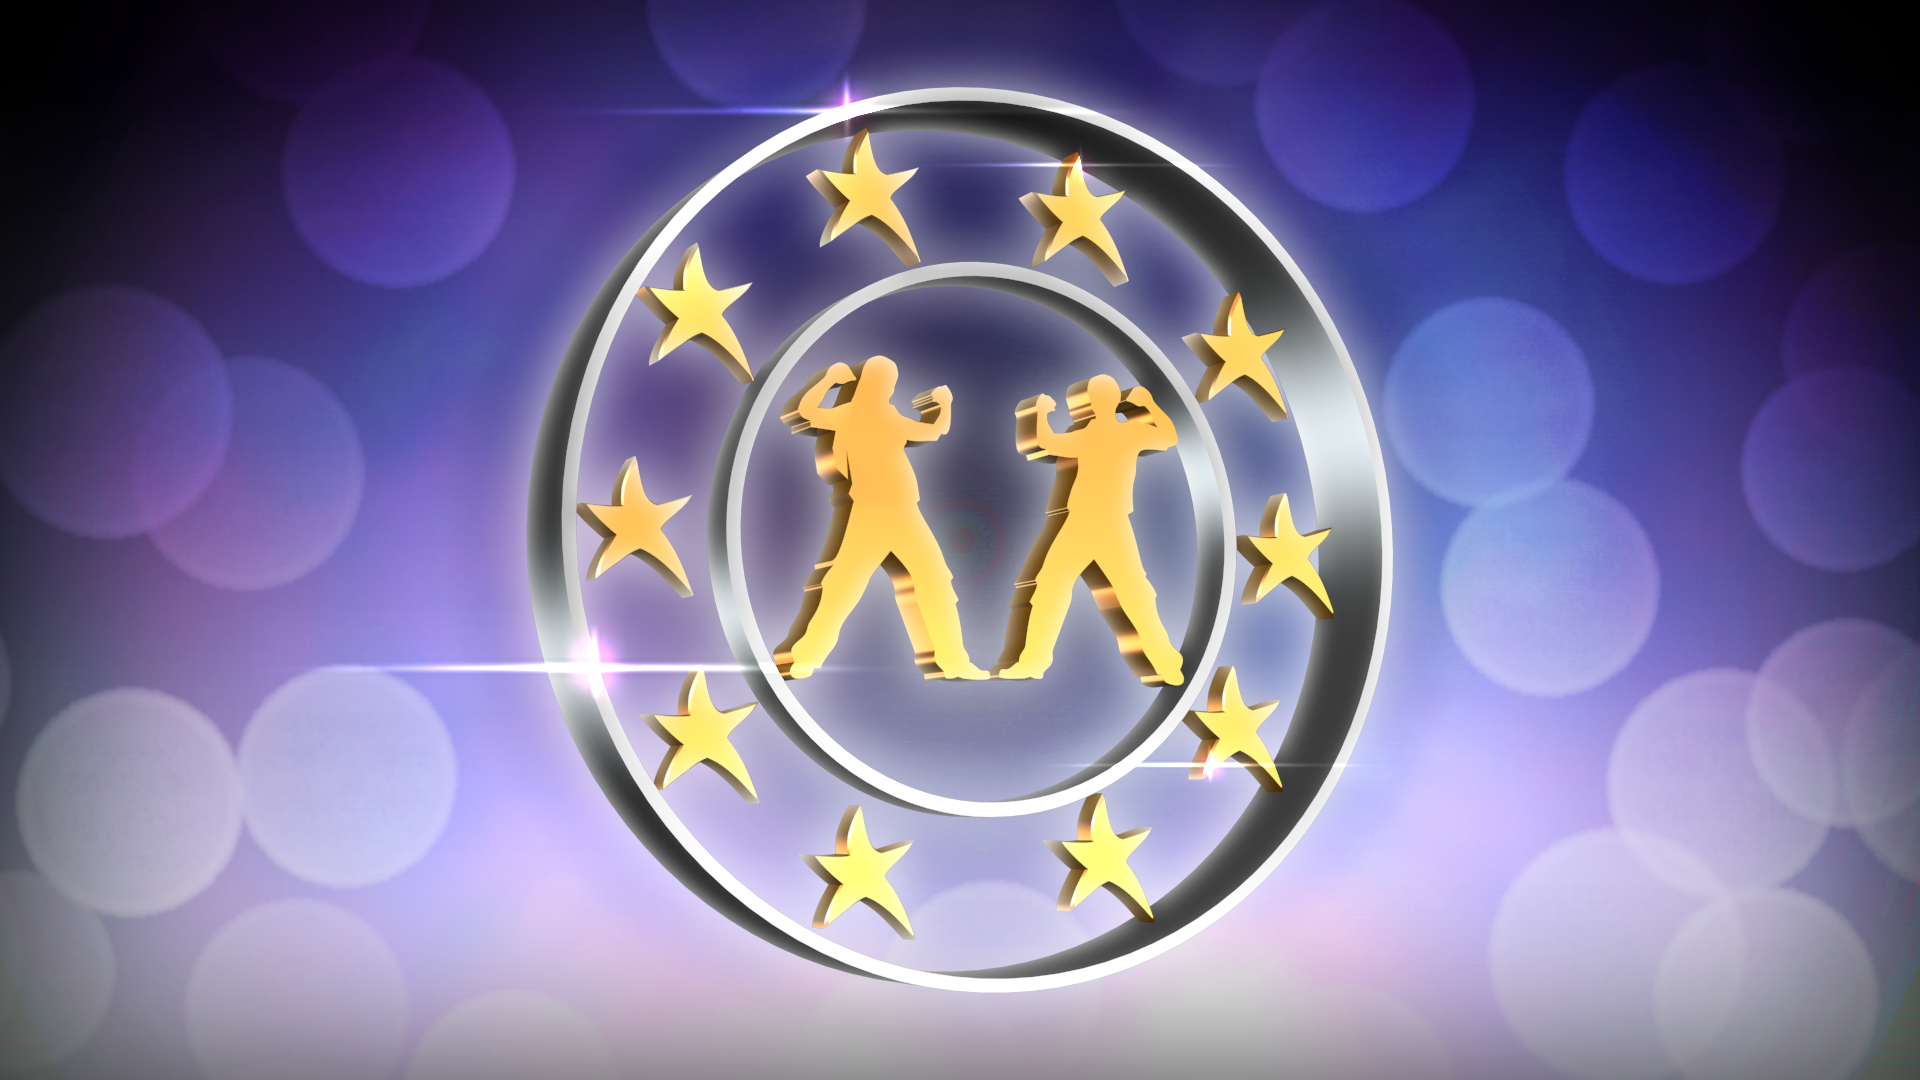 Icon for Duo Stars